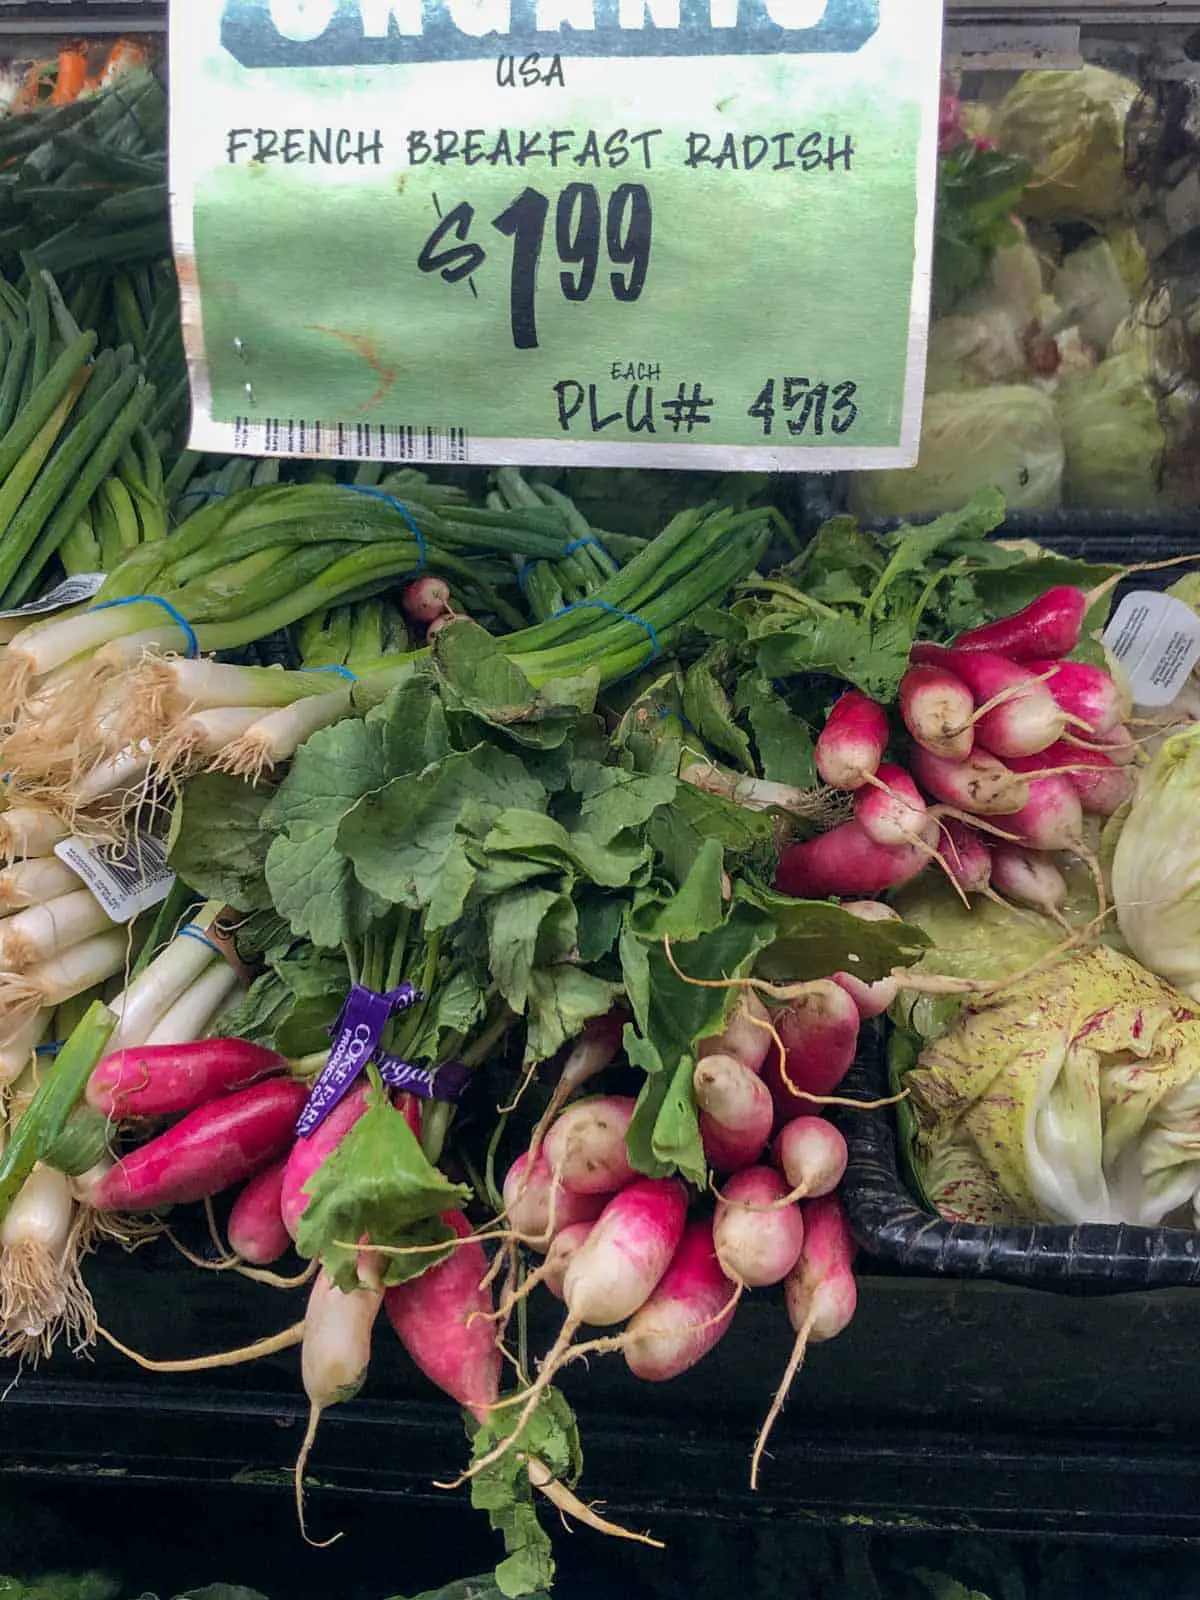 A display of French breakfast radishes in a grocery store with a sign showing that they are $1.99 per bundle.